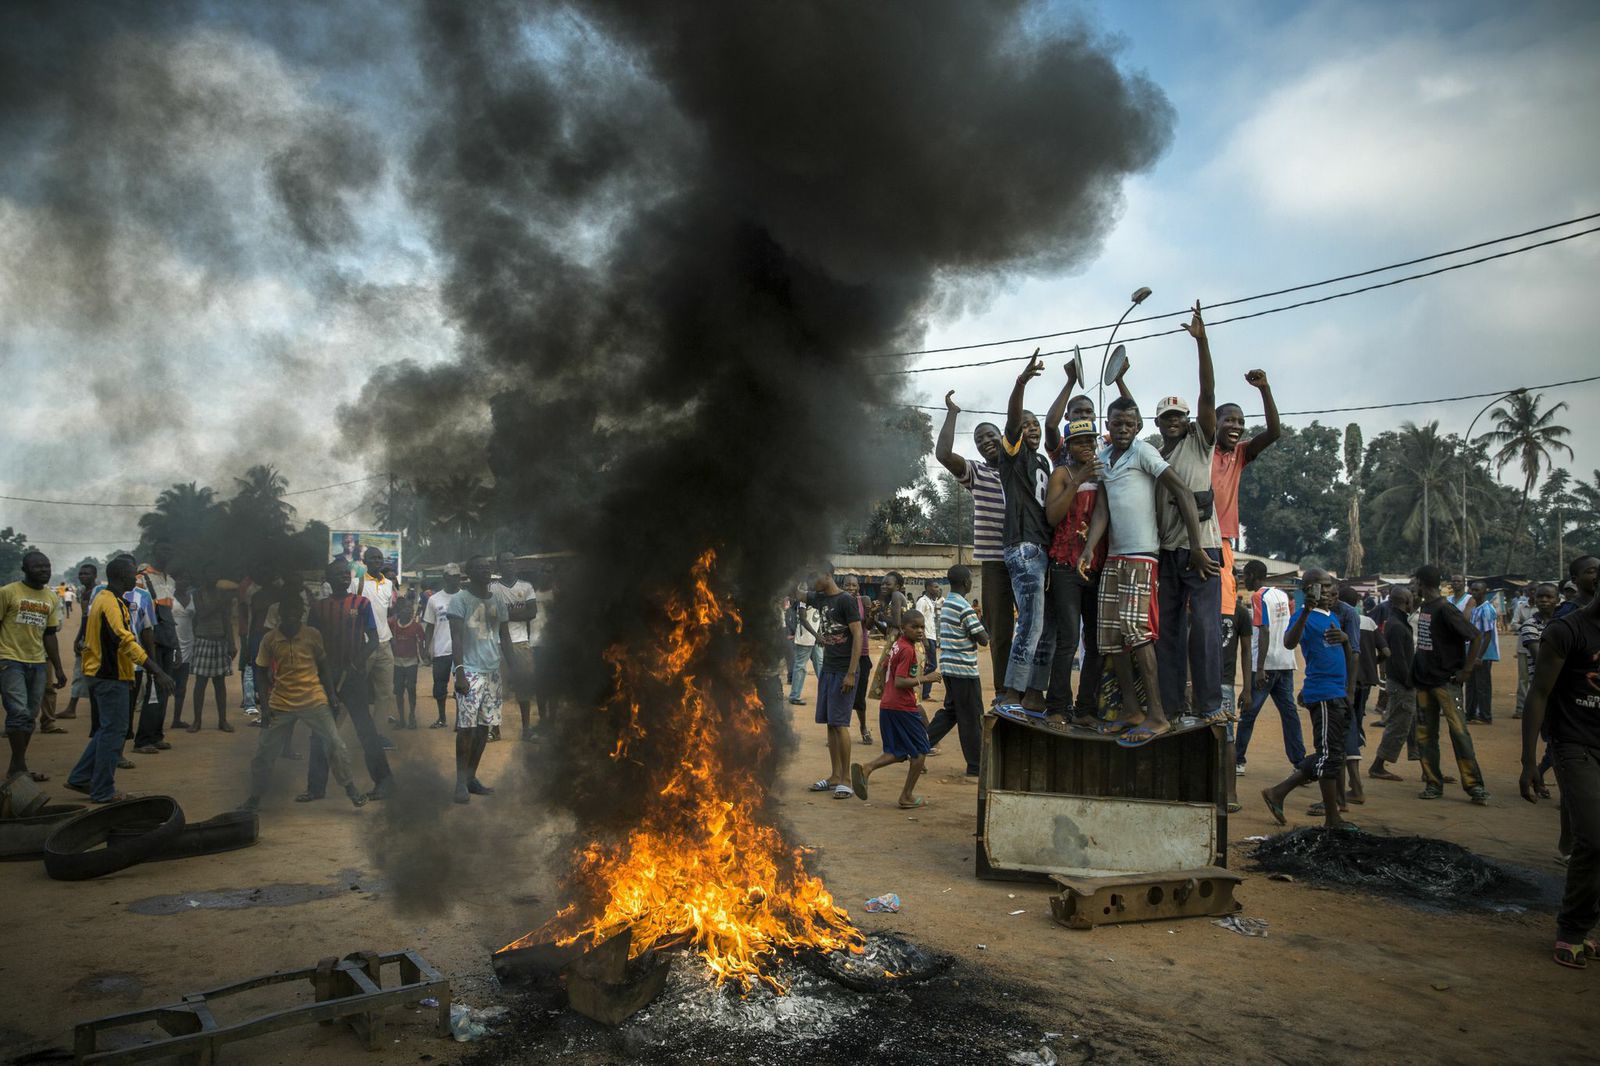 Demonstrators gather on a street in Bangui, the capital, to call for the resignation of interim president Michel Djotodia following the murder of Judge Modeste Martineau Bria by members of the Seleka. Bangui, Central African Republic.